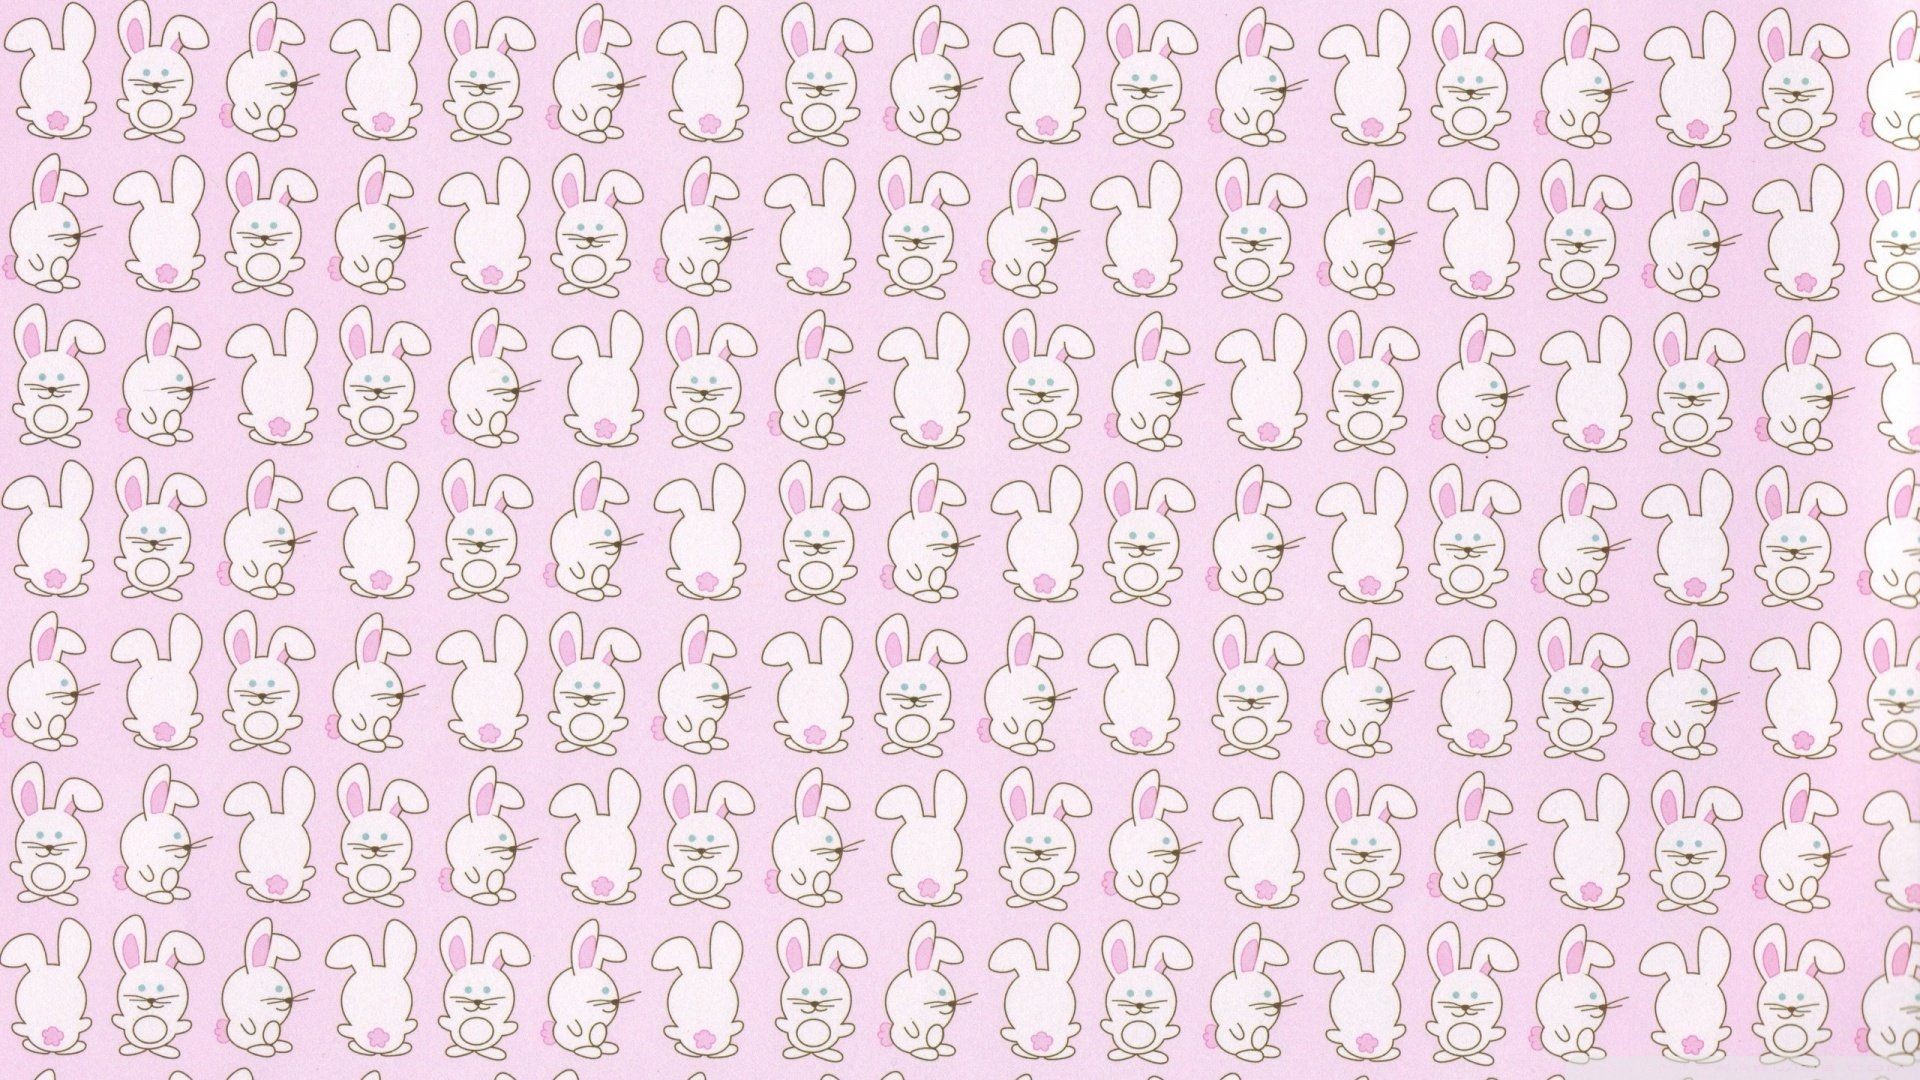 1920x1080 Cute background patterns for twitter - photo#13